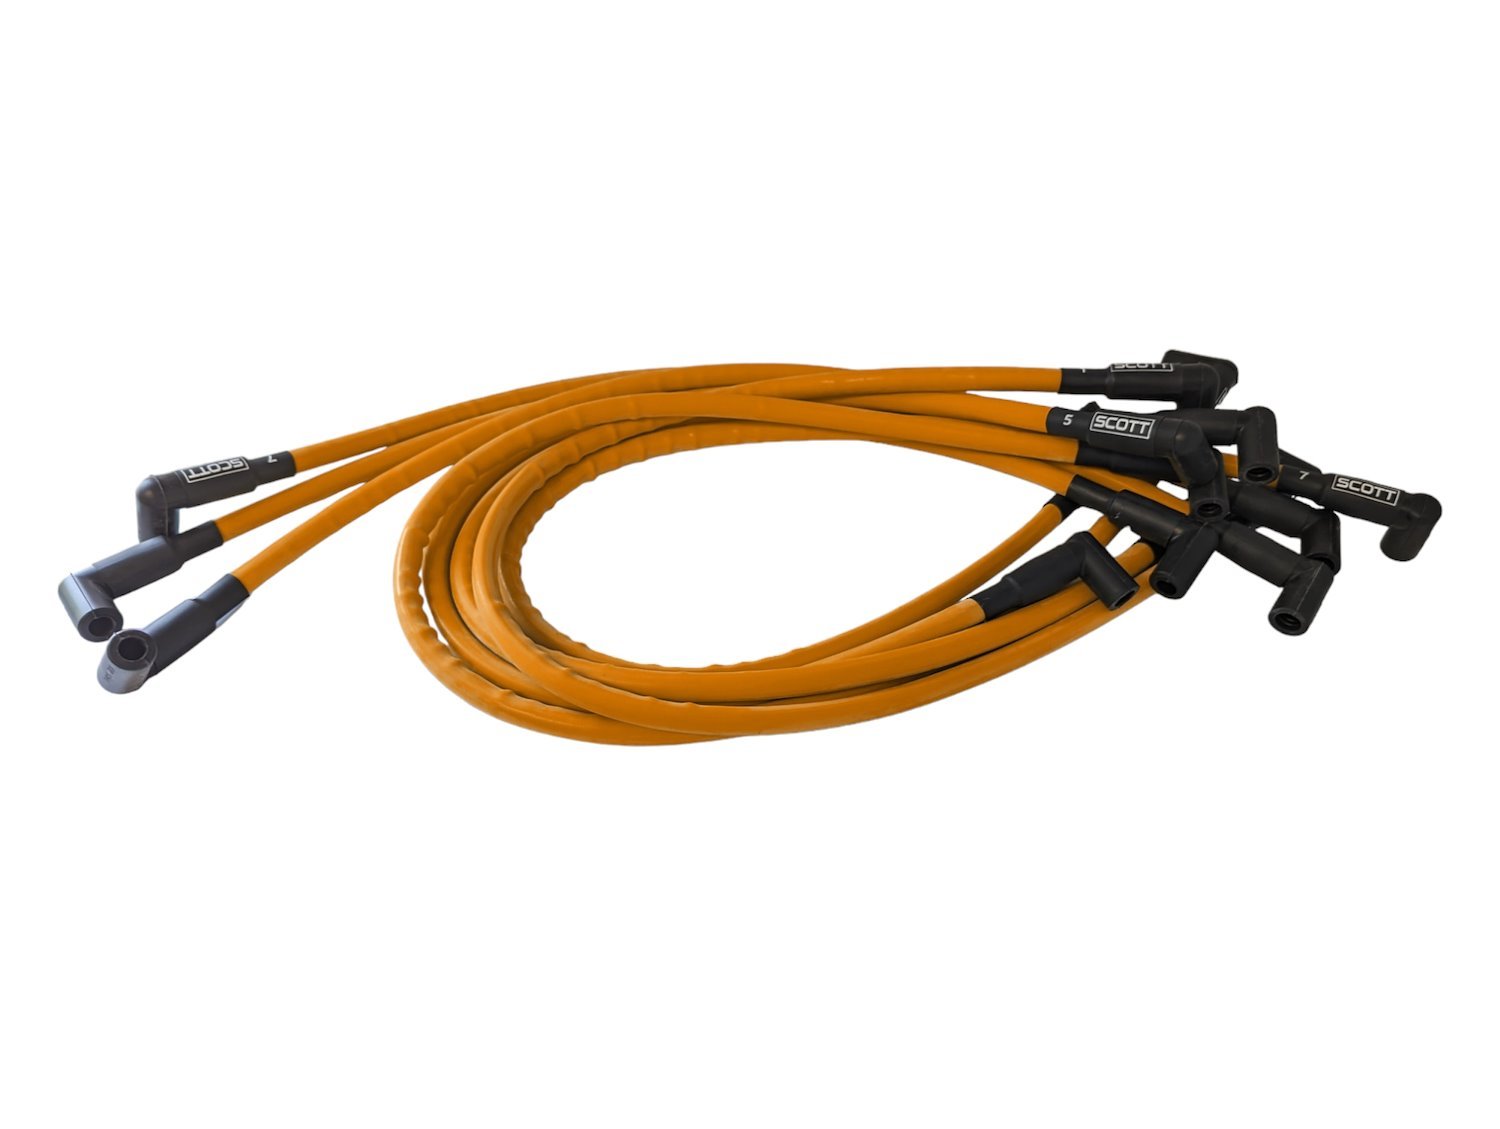 SPW-CH-530-5 High-Performance Silicone-Sleeved Spark Plug Wire Set for Big Block Ford, Under Header [Orange]